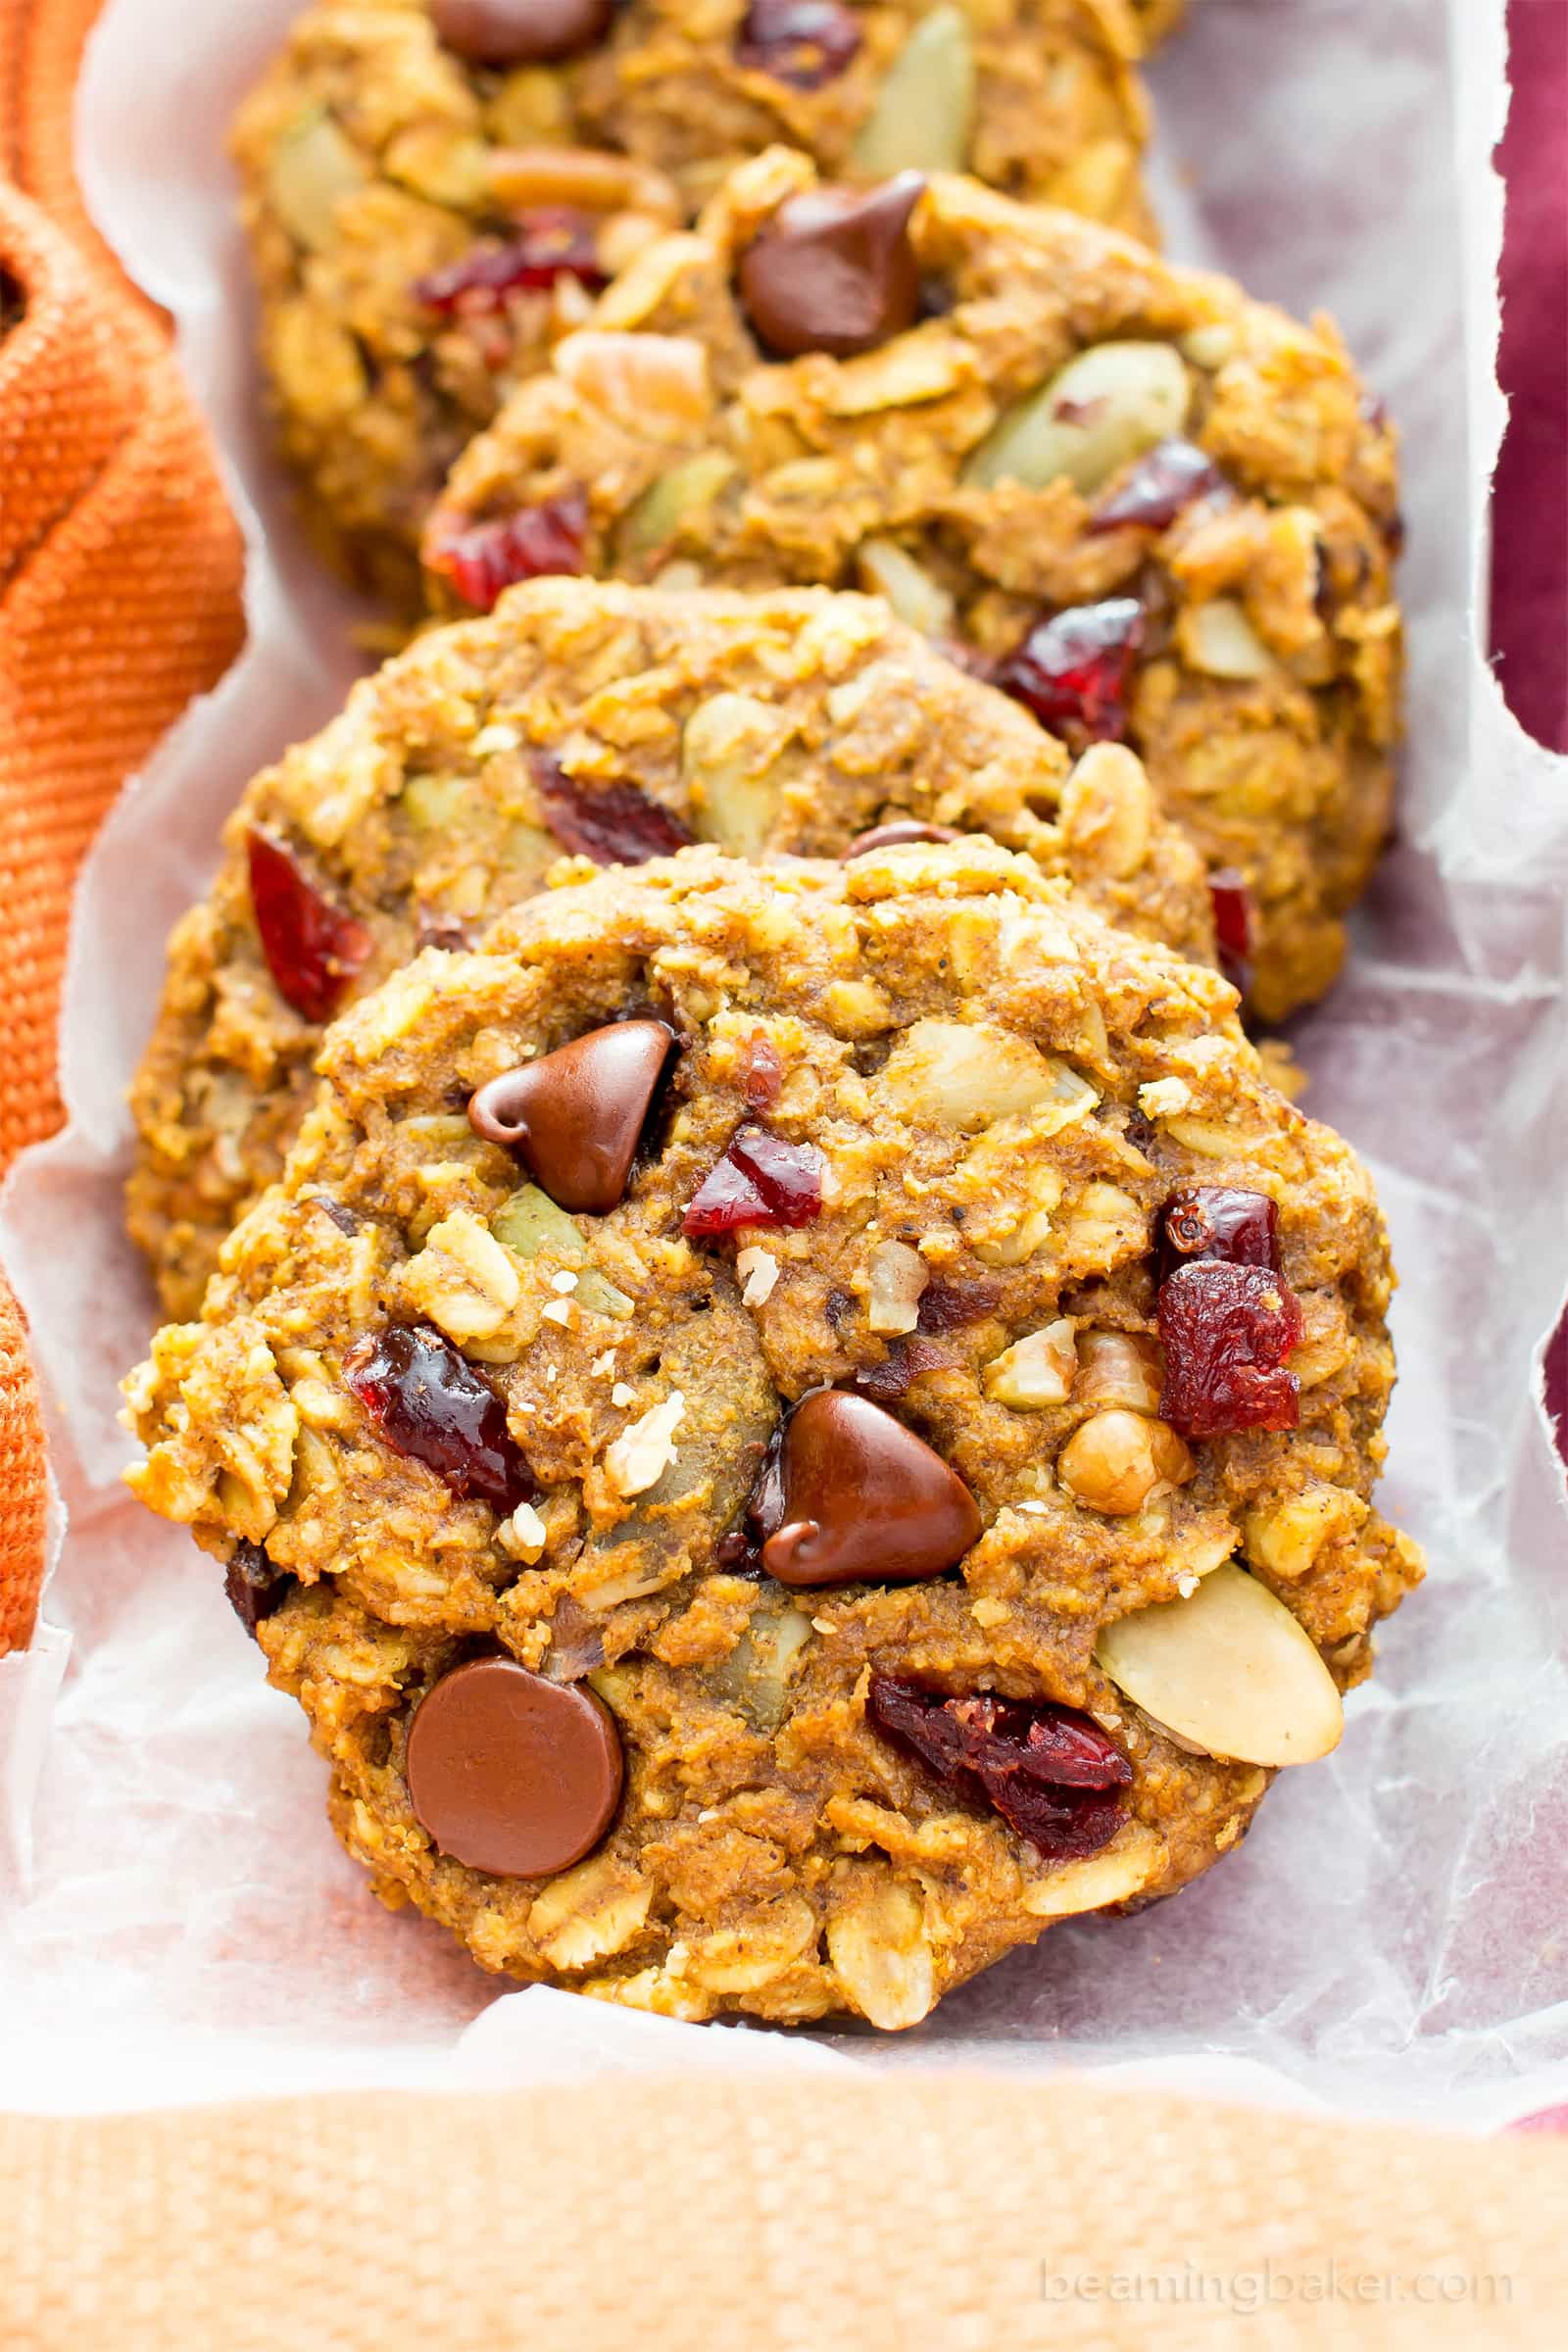 Pumpkin Chocolate Chip Oatmeal Breakfast Cookies (V, GF): Soft, chewy pumpkin oatmeal cookies packed with chocolate chips and pumpkin seeds. Perfect for breakfast or an afternoon treat! #Vegan #GlutenFree #DairyFree #Cookies #Baking #Breakfast | Recipe on BeamingBaker.com